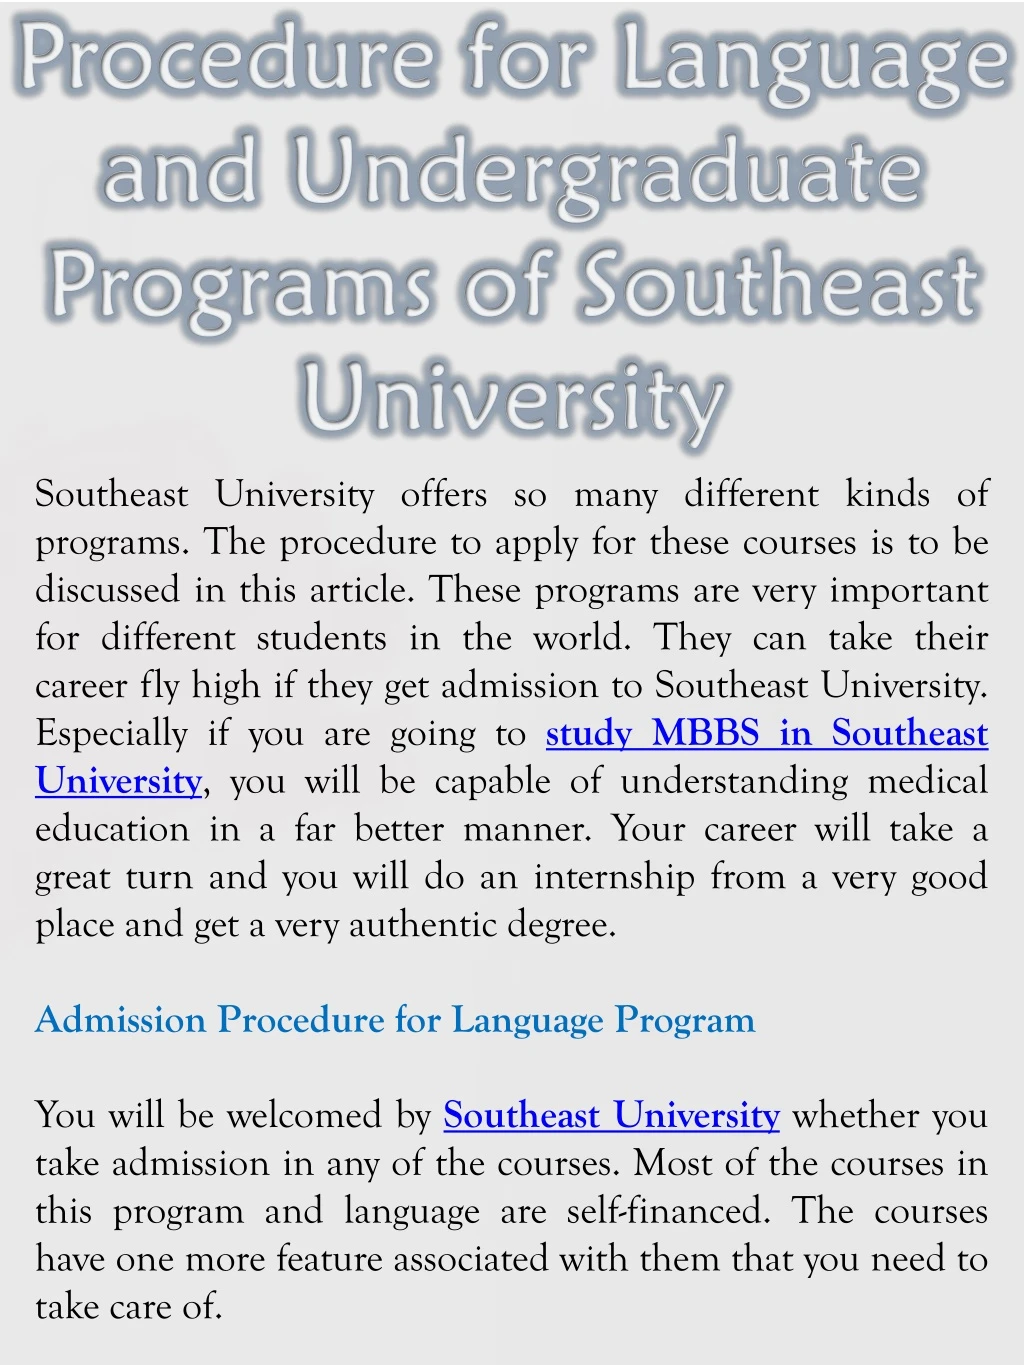 southeast university offers so many different